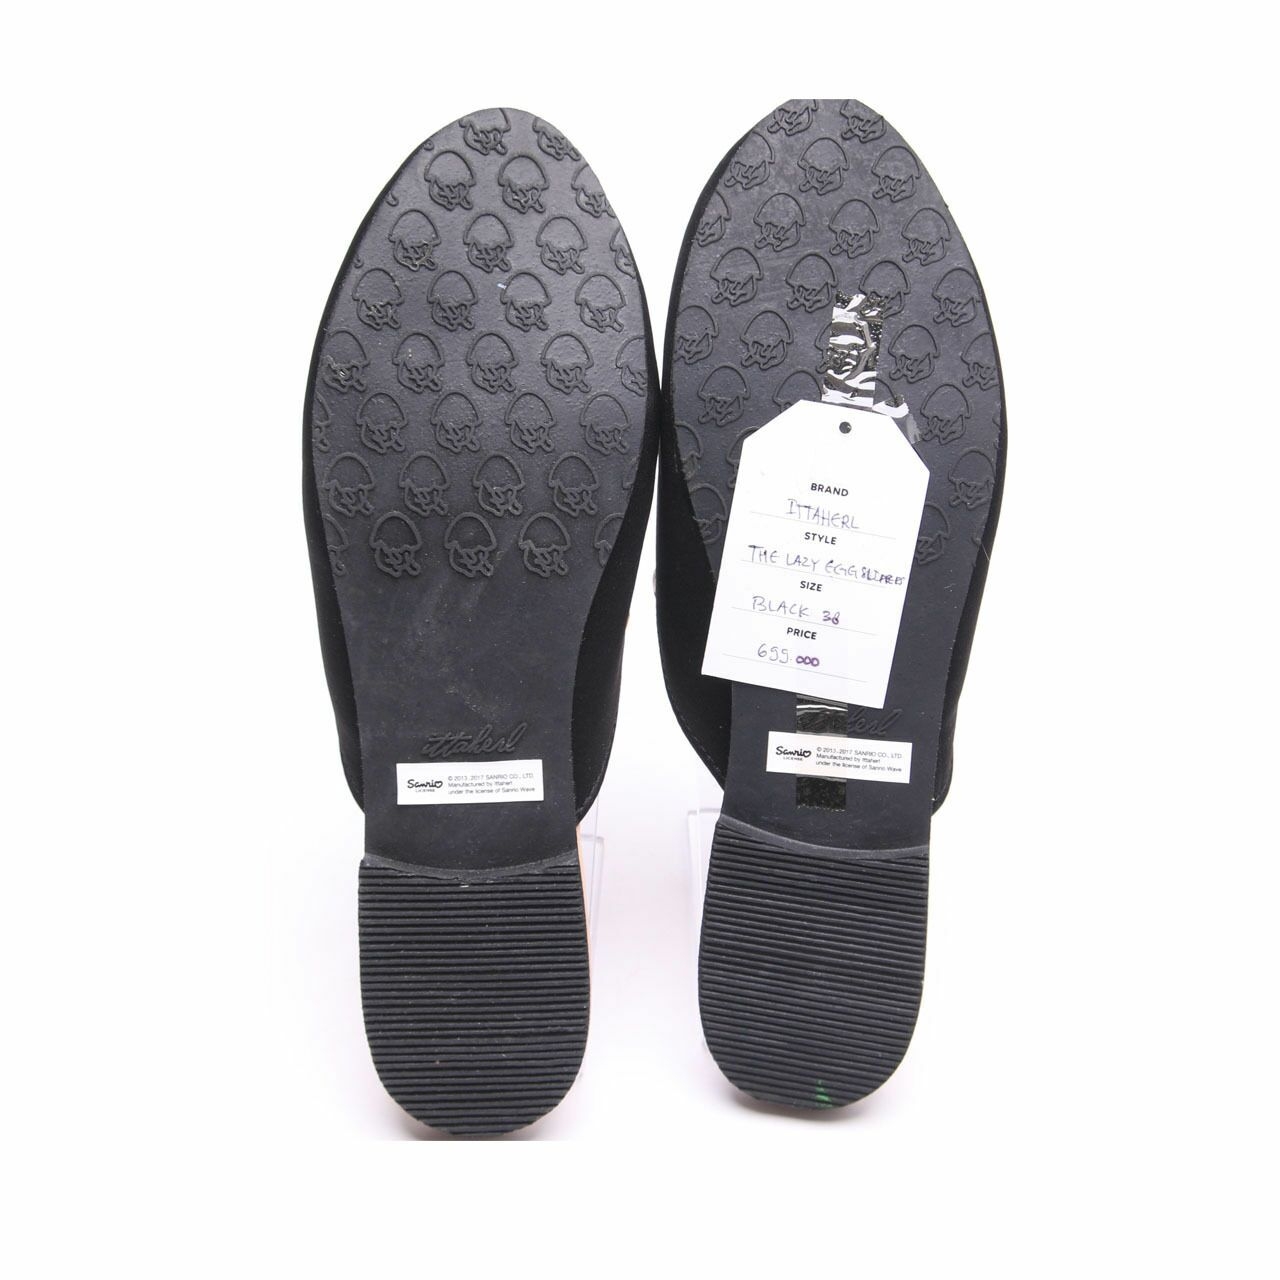 Ittaherl Black The Lazy Egg Sitprers Mules Sandals